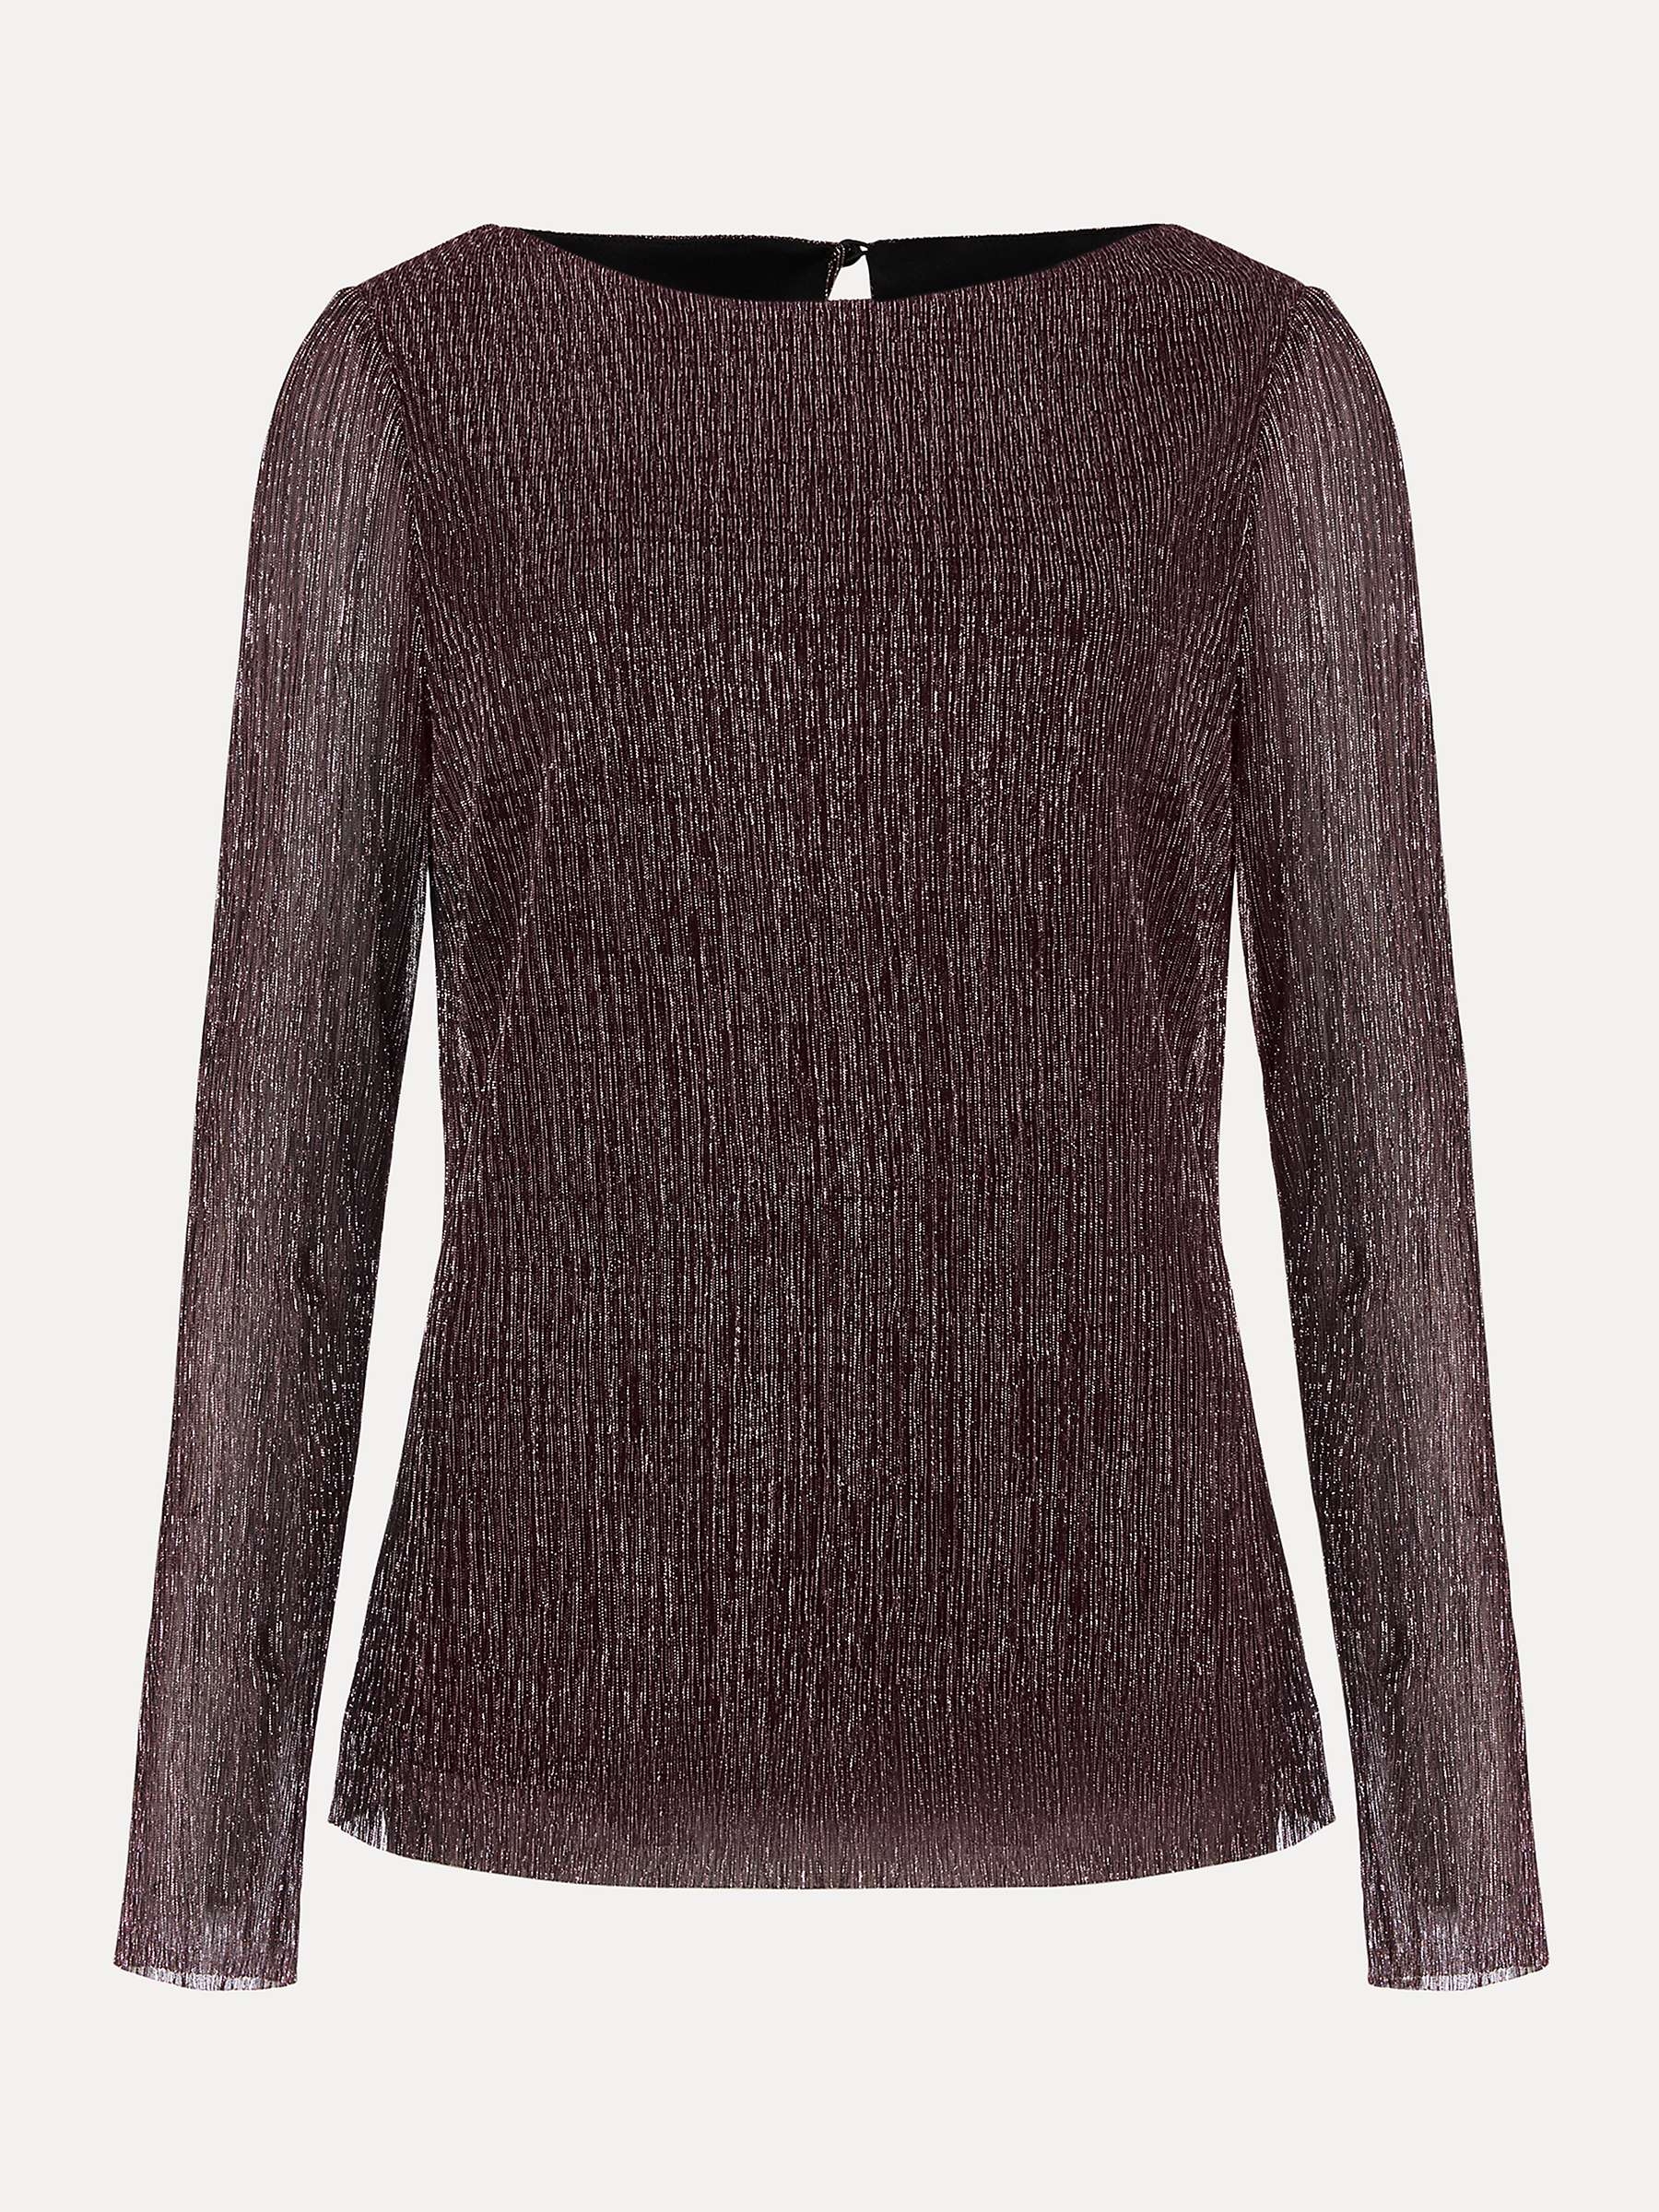 Buy Phase Eight Alix Sparkly Plisse Top, Rose Gold Online at johnlewis.com